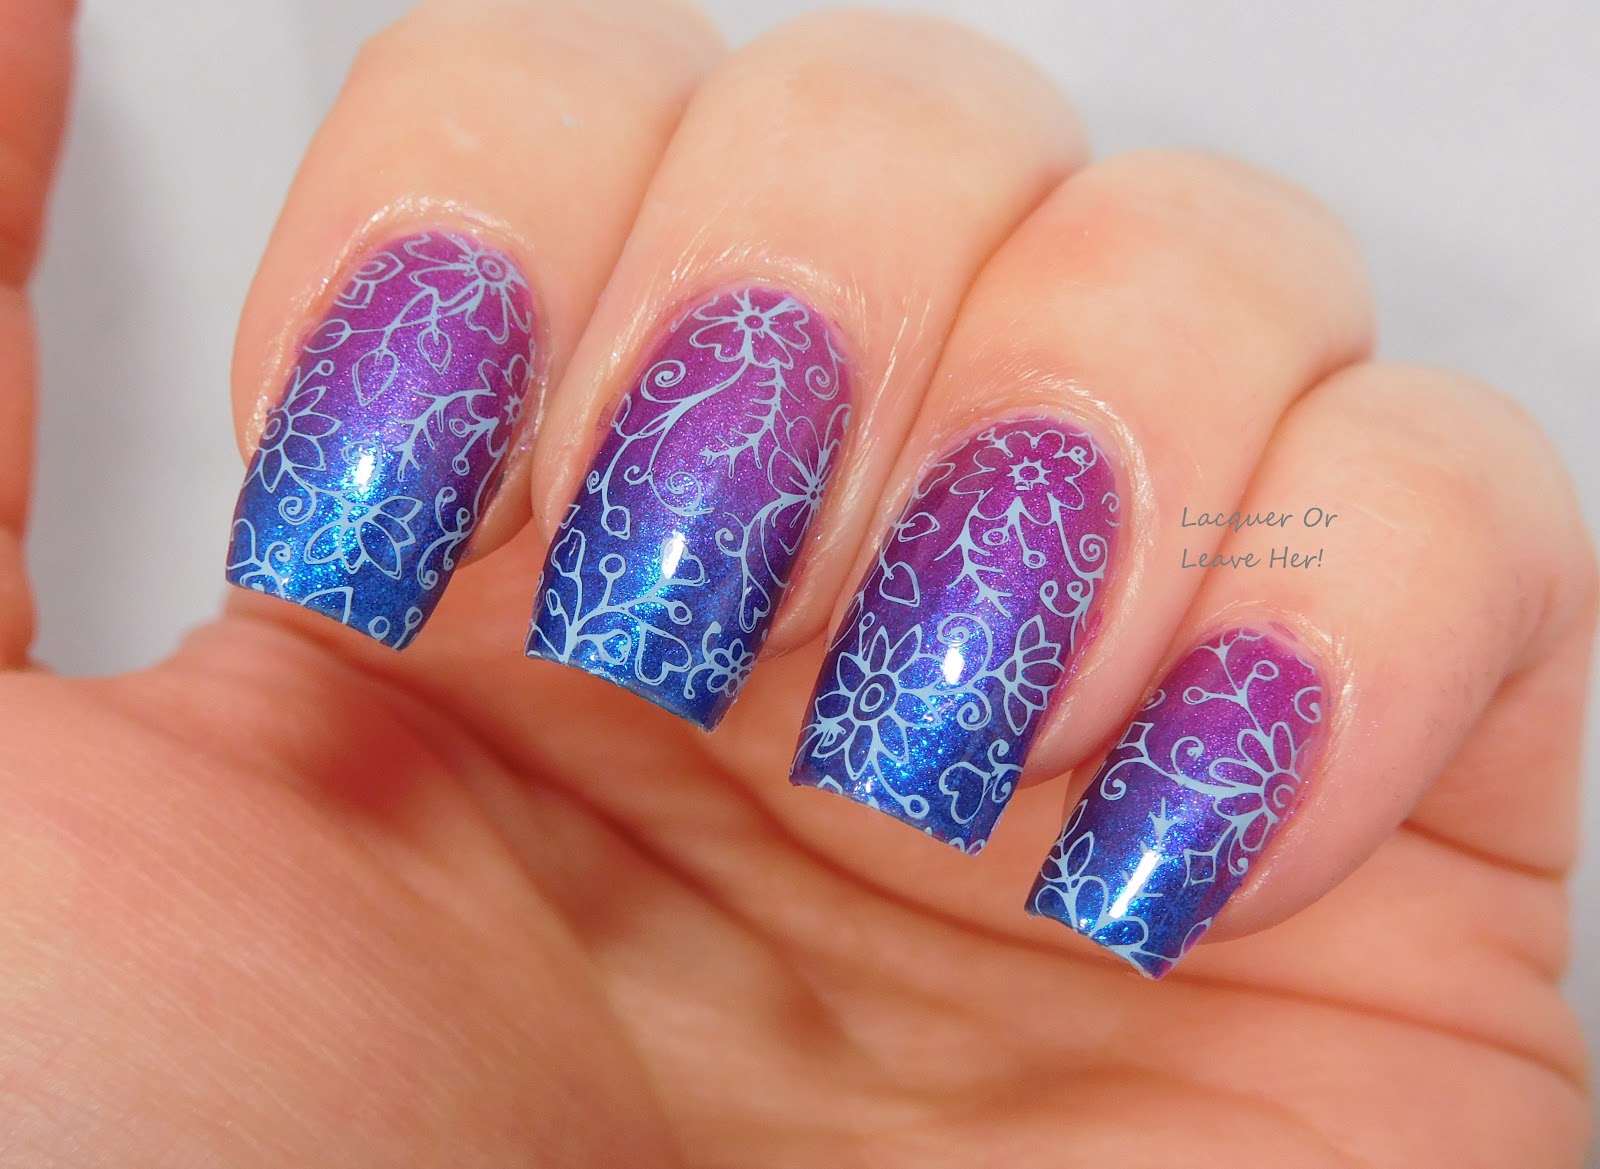 2. Trendy Nail Art Ideas for Teens - wide 7